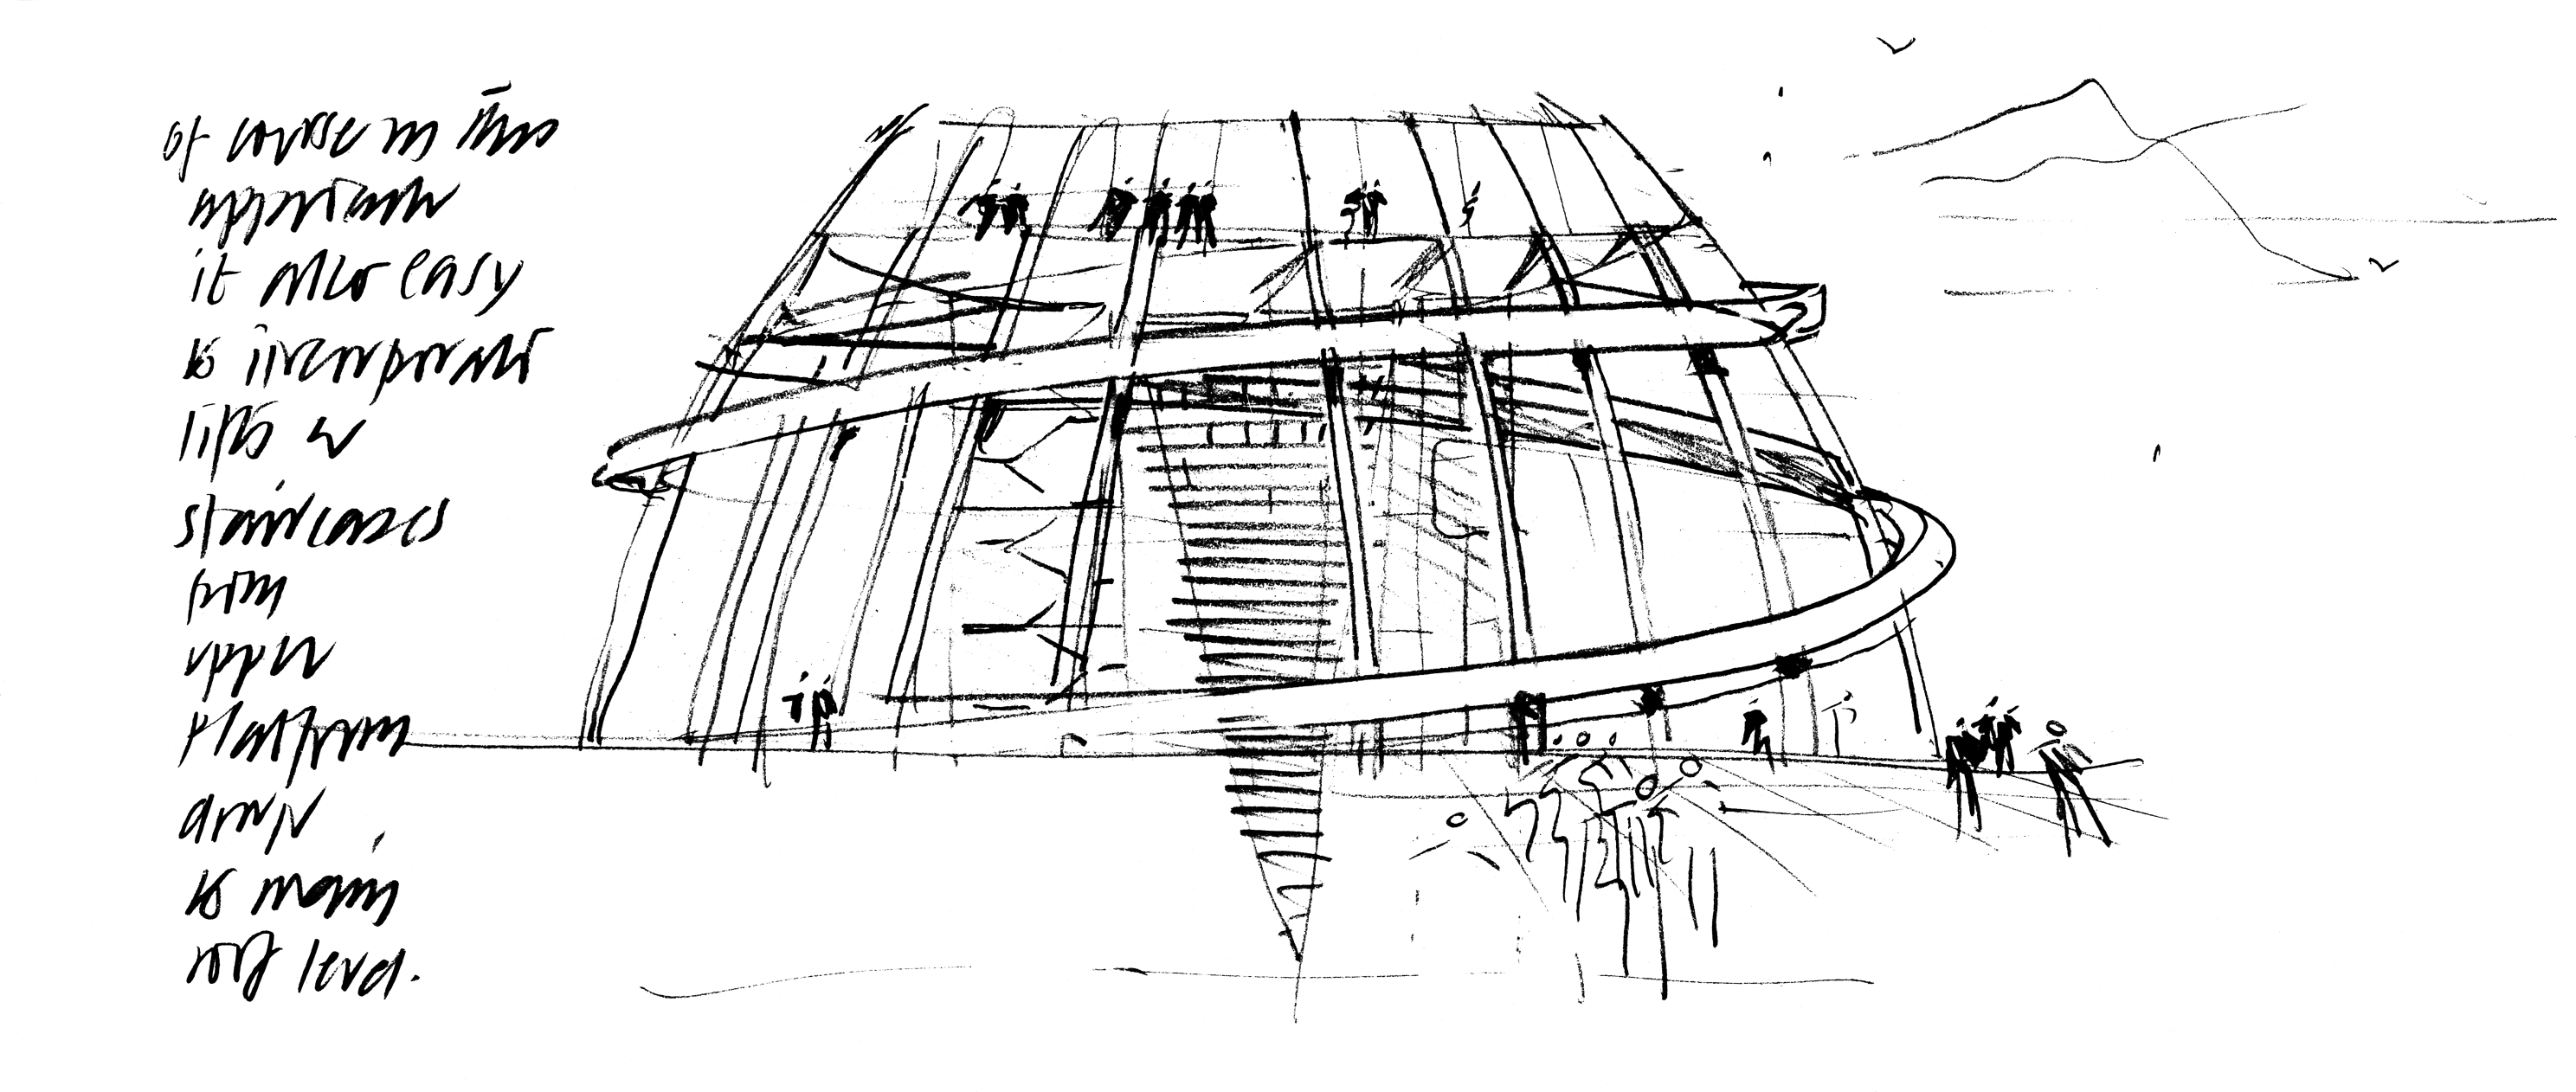 Building Concept Sketches  The Architectural Nonsensical